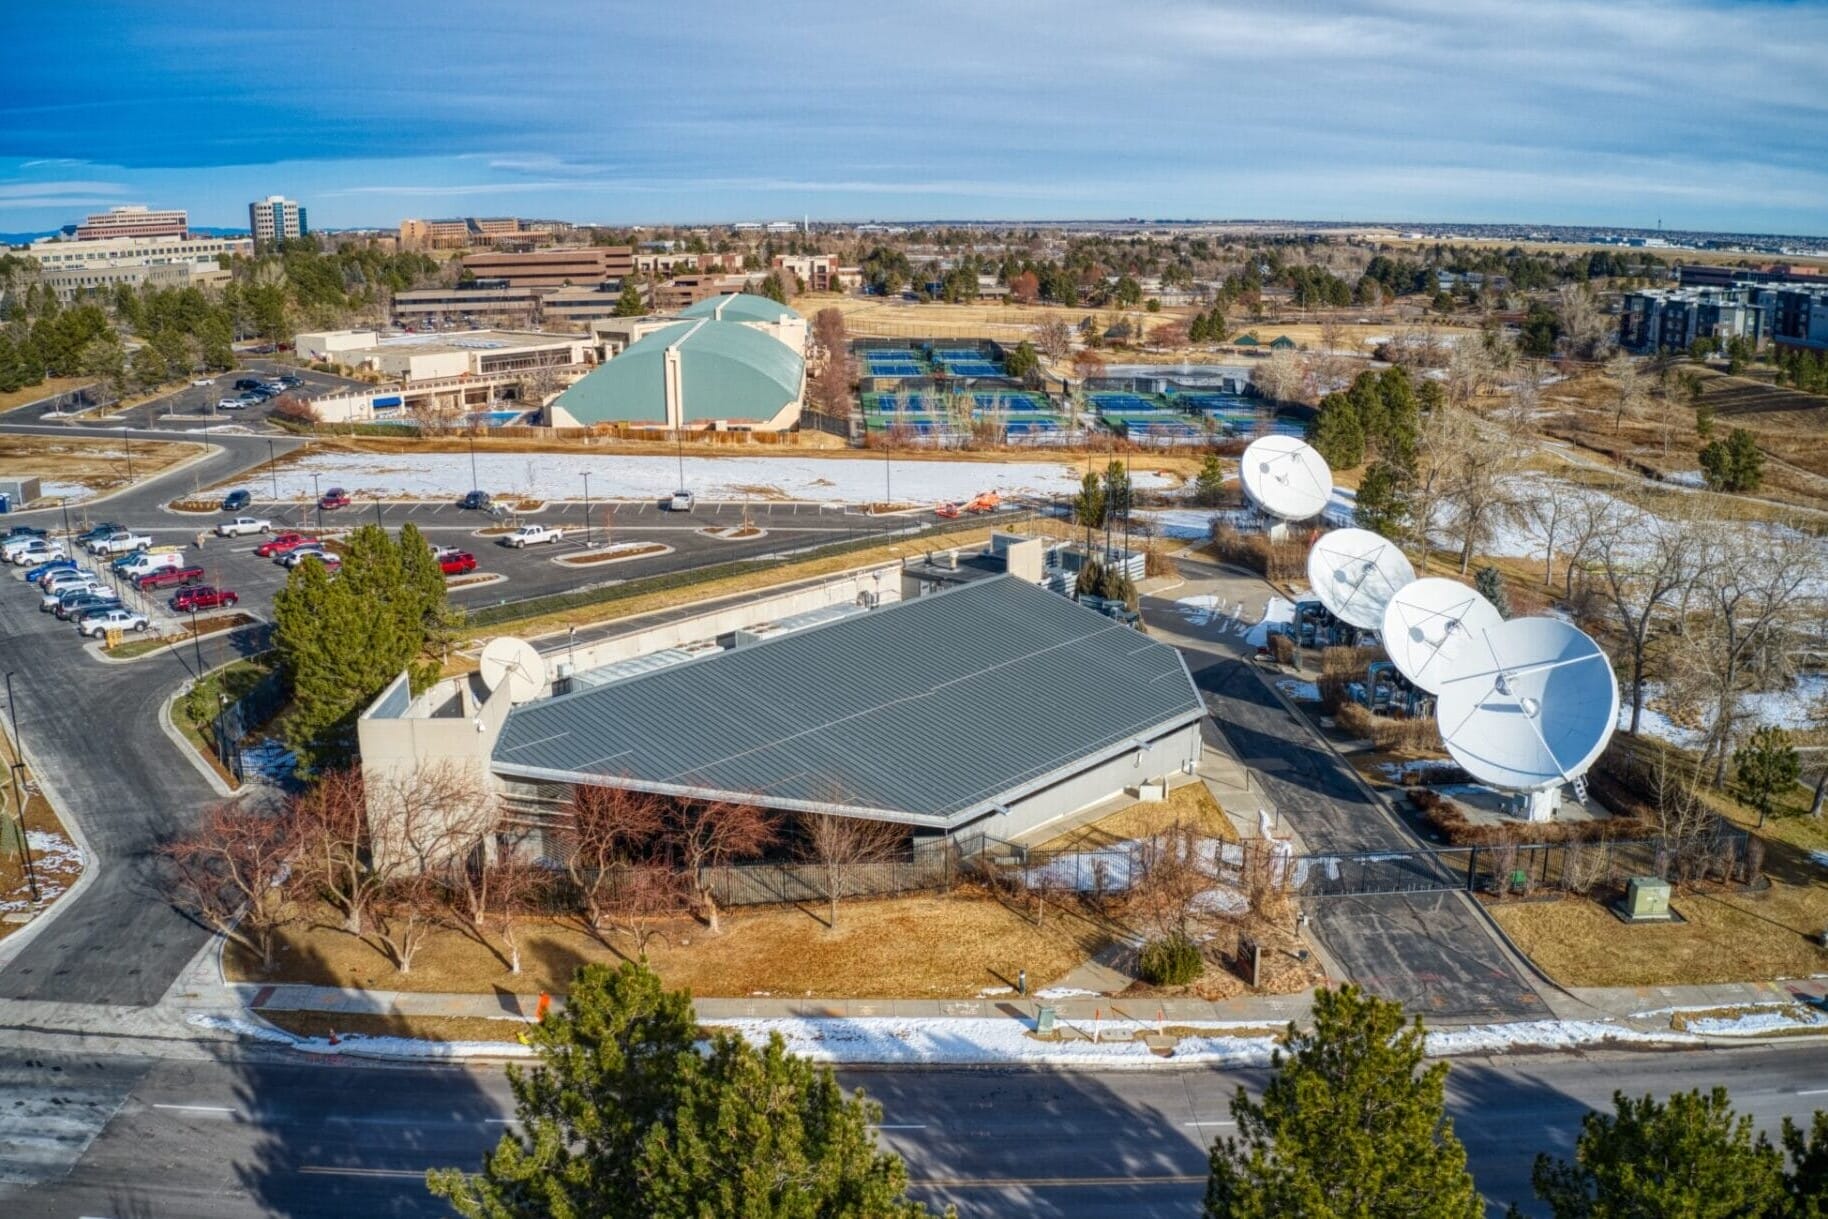 Aerial view of the DIRECTV Data Center Portfolio with buildings, satellite dishes, and a parking area, partially covered in snow.